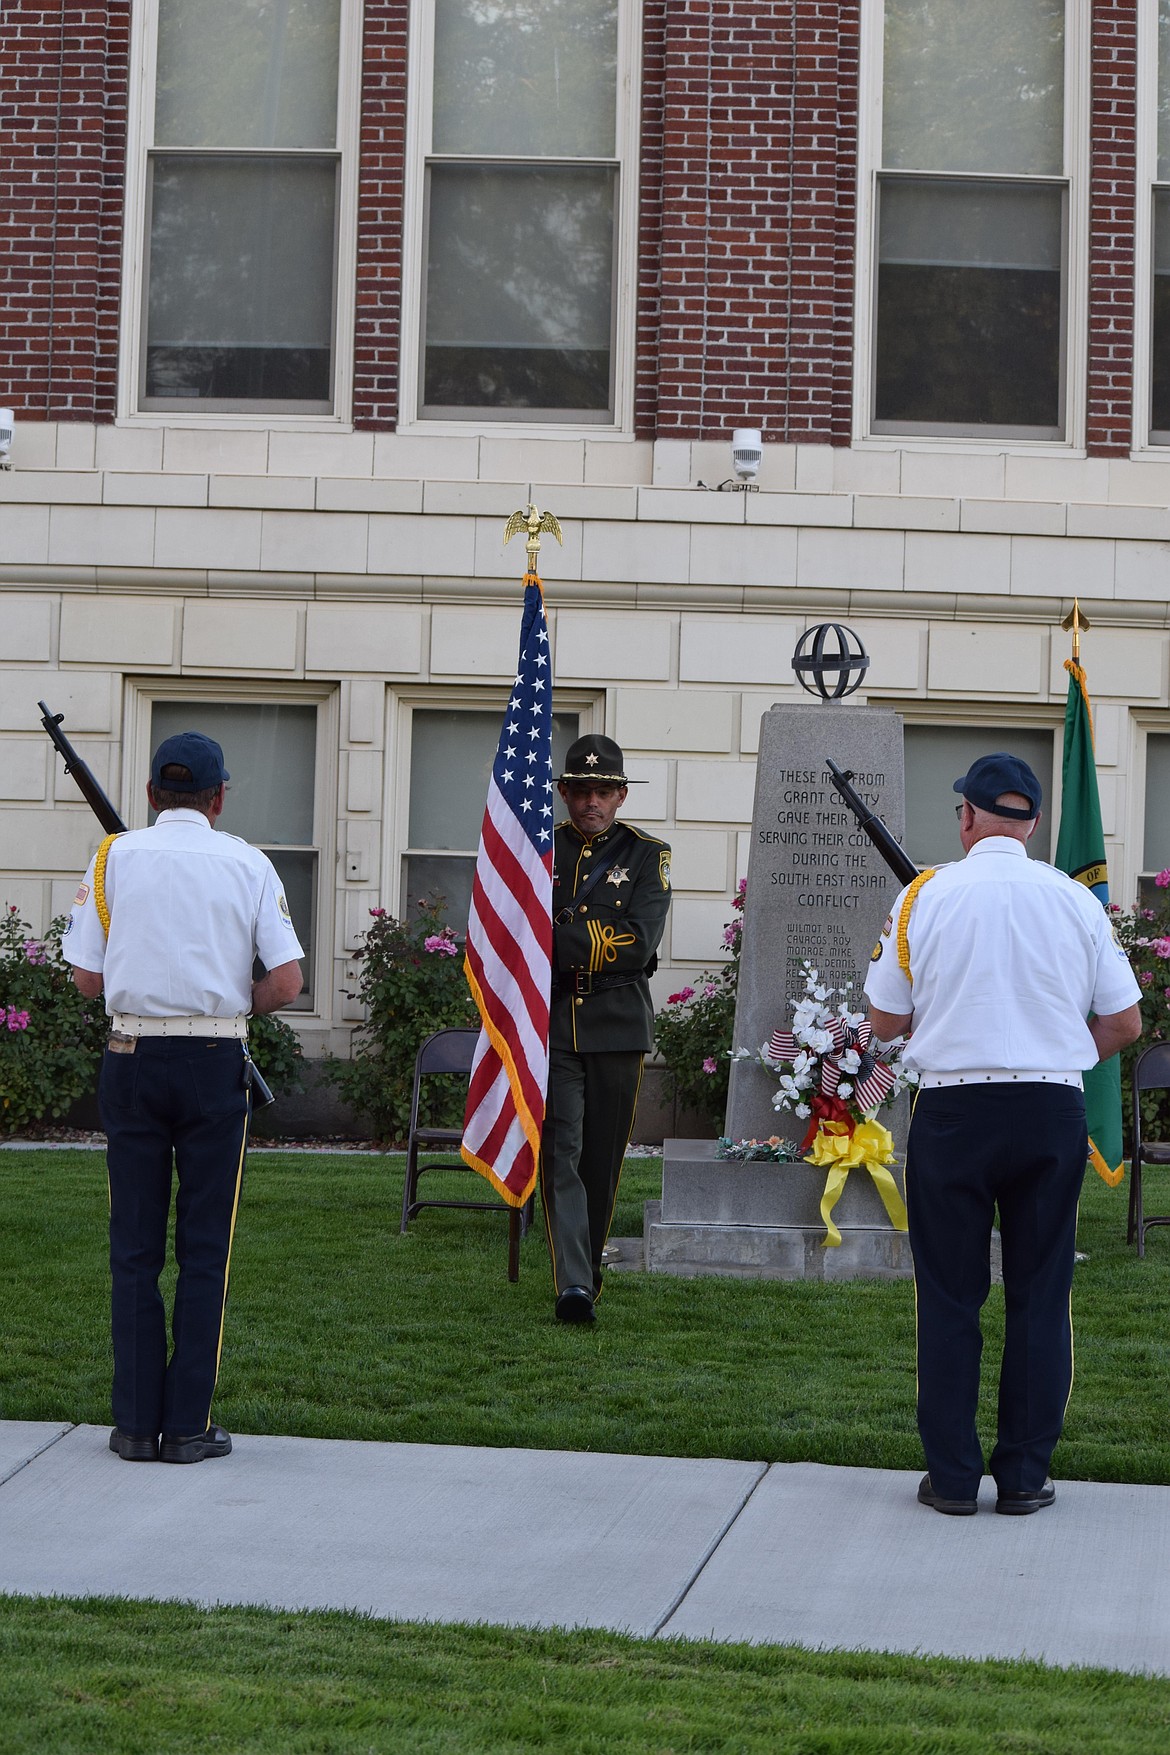 A Grant County Sheriff’s Office officer performs his duties as part of the honor guard Monday, flanked by Legionnaires from the Ephrata American Legion post’s honor guard.